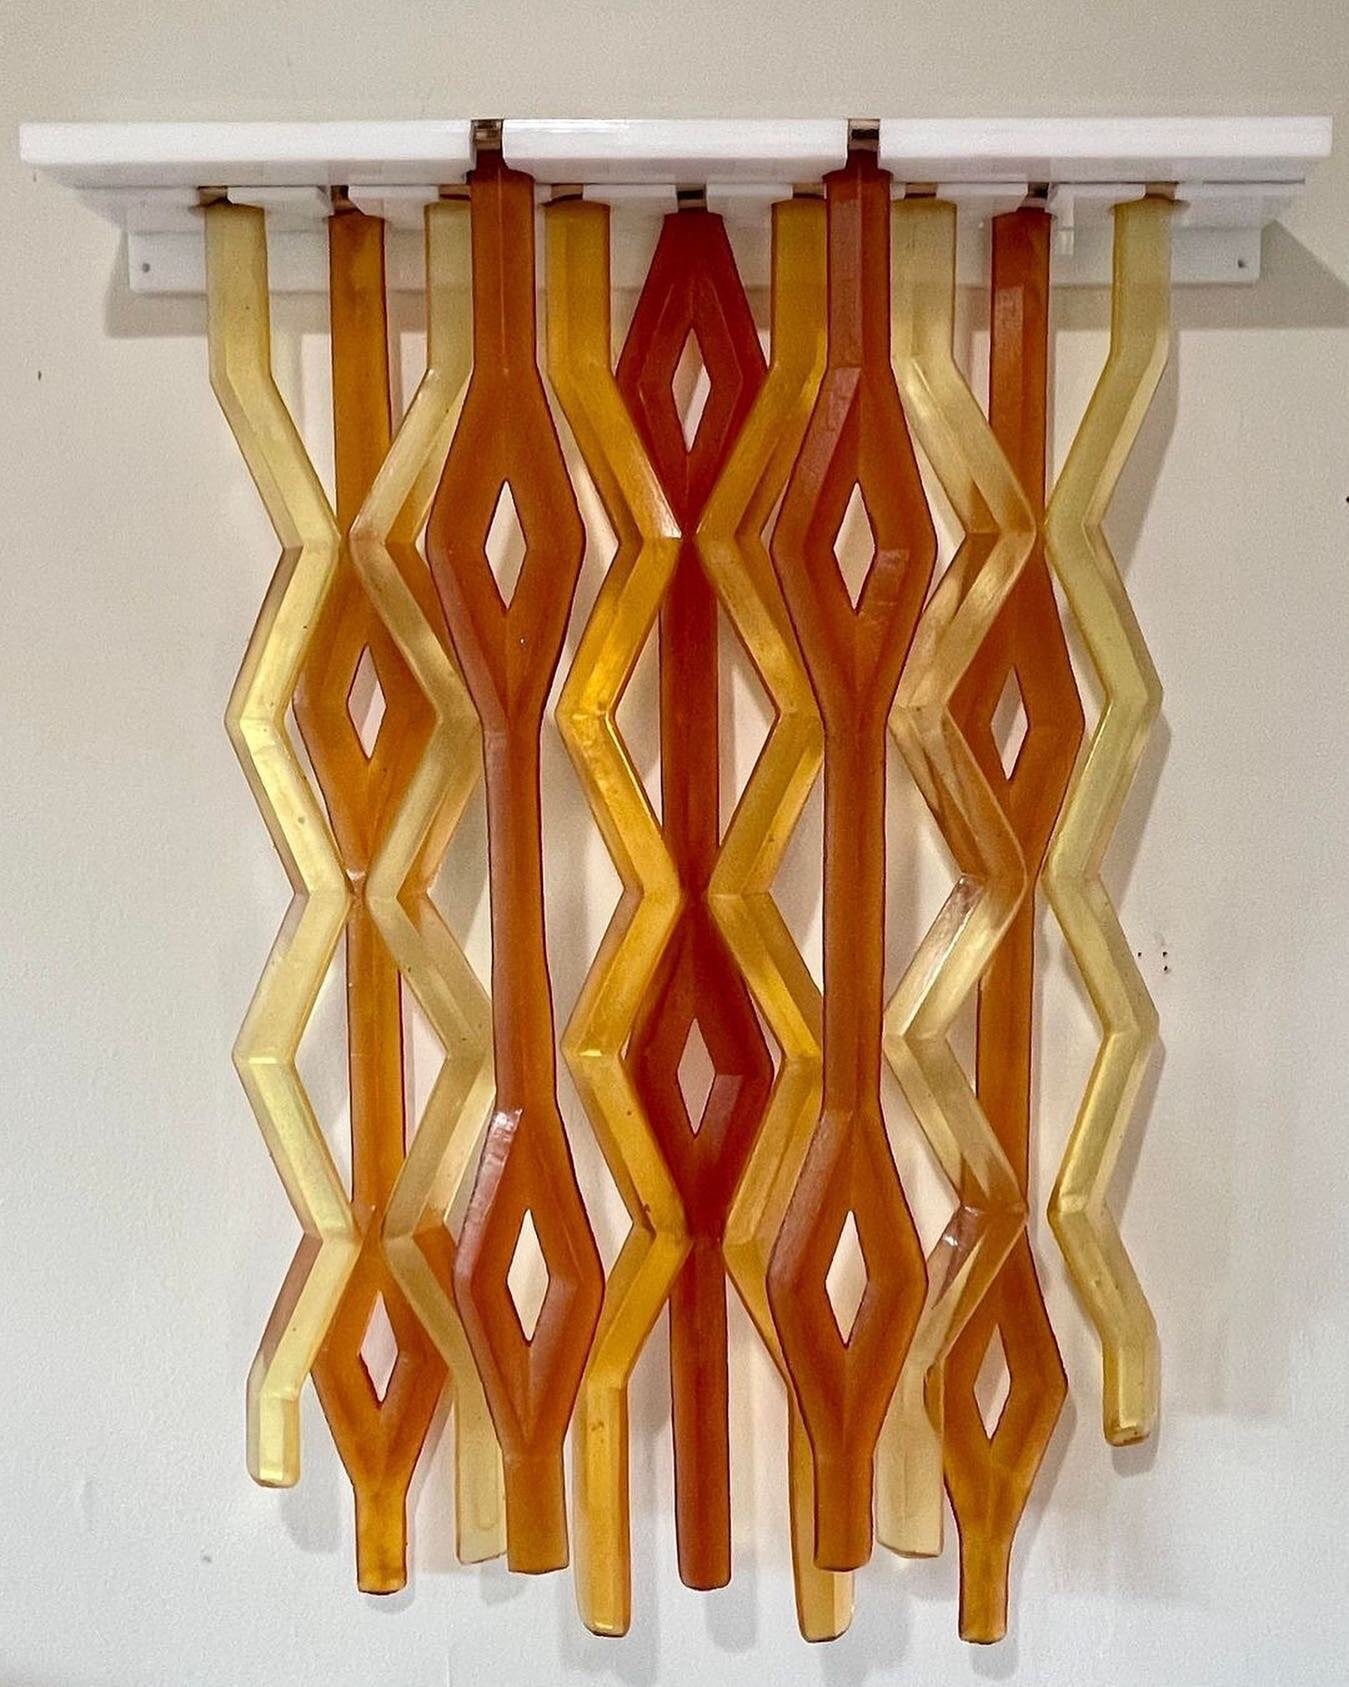 Posted @withregram &bull; @glassartinnz Tangle by Thomas Barter
Exhibited at Focus On Glass 22, Estuary Art Centre Orewa until Oct 30

My current work is focusing on weaving. The long strands of glass are a reference to the warp of a weaving board. T